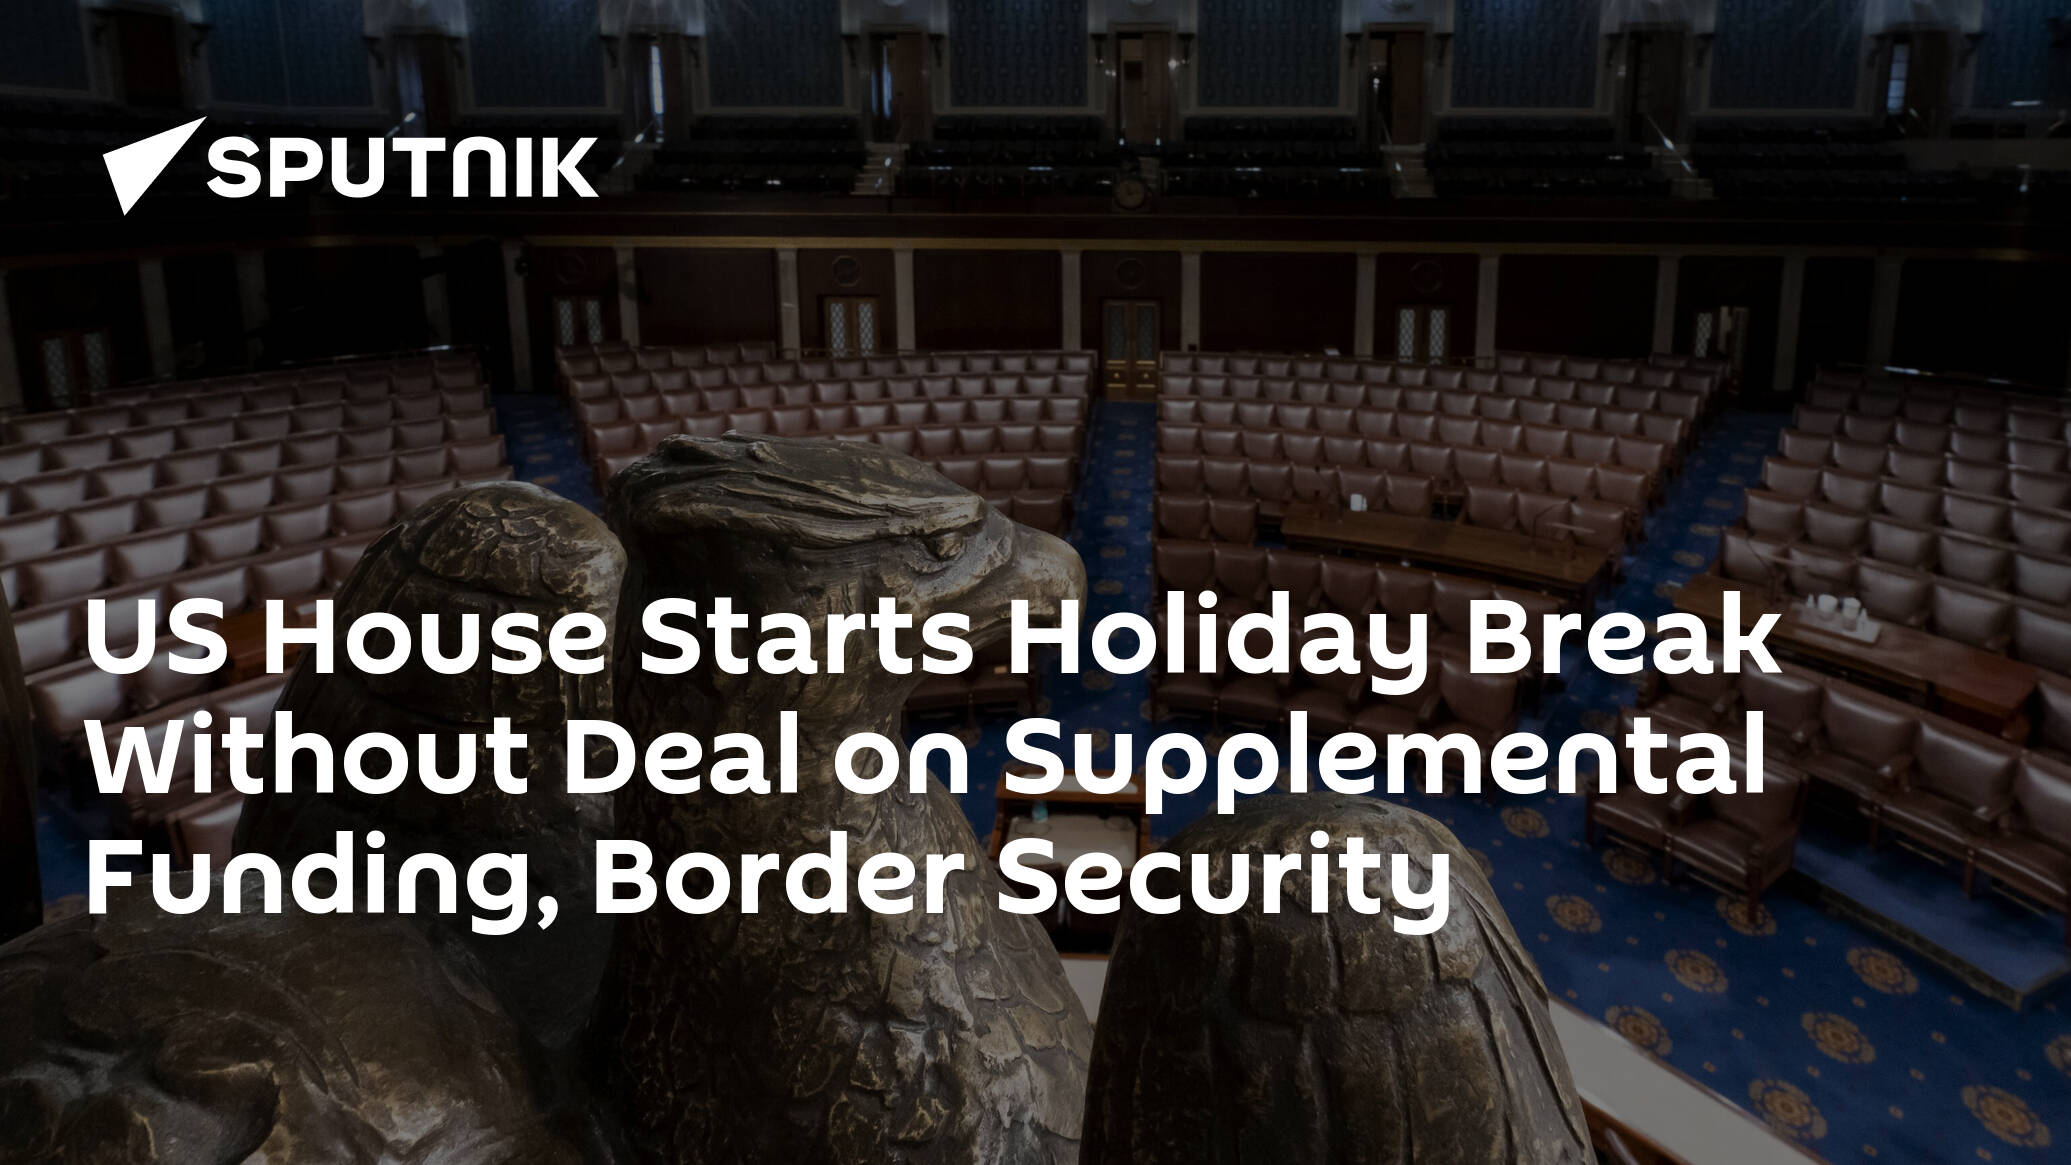 US House Starts Holiday Break Without Deal on Supplemental Funding, Border Security